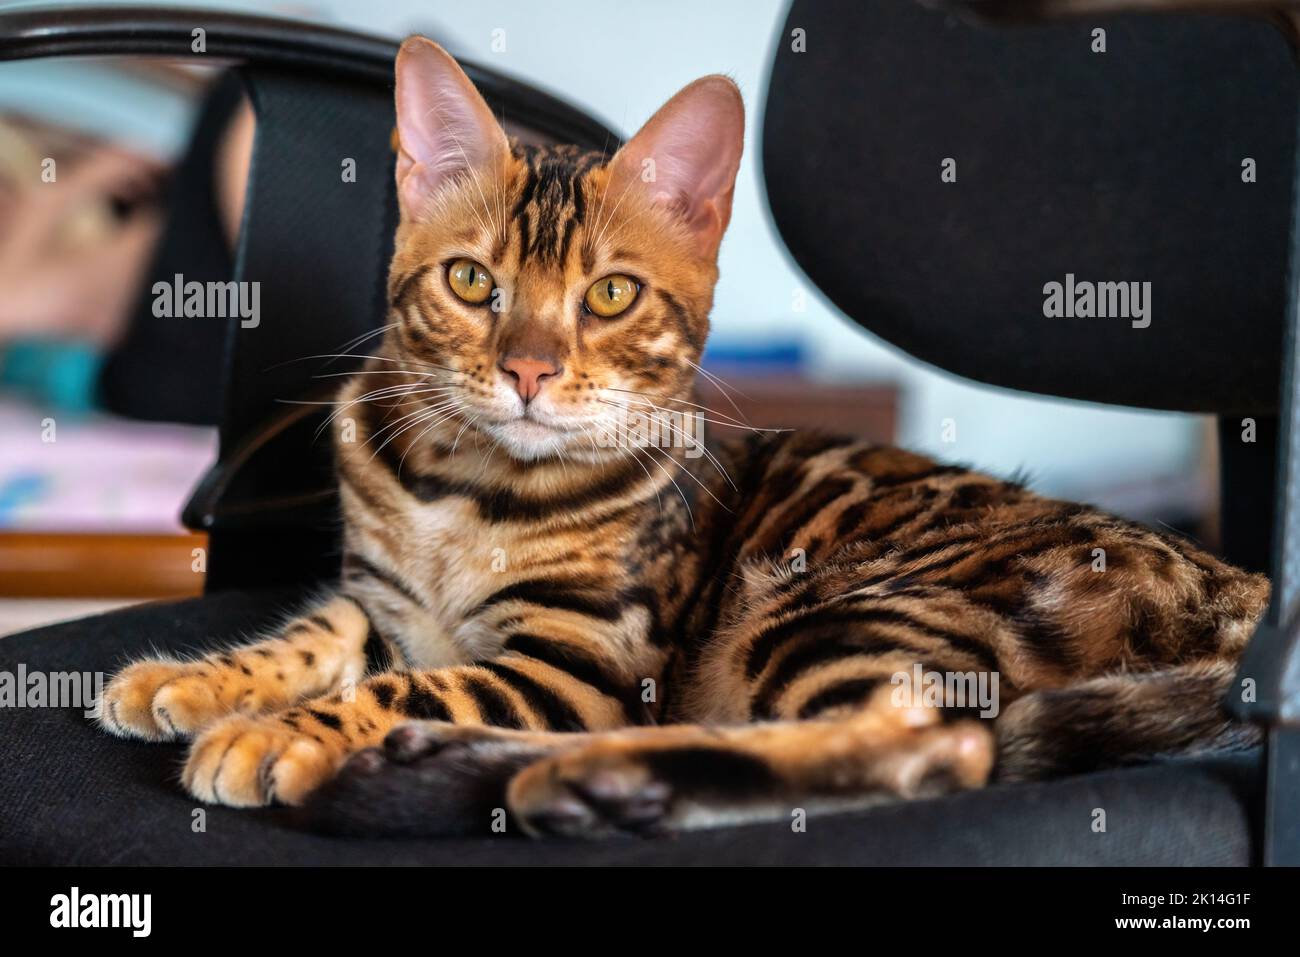 Young purebred bengal cat resting on a chair Stock Photo